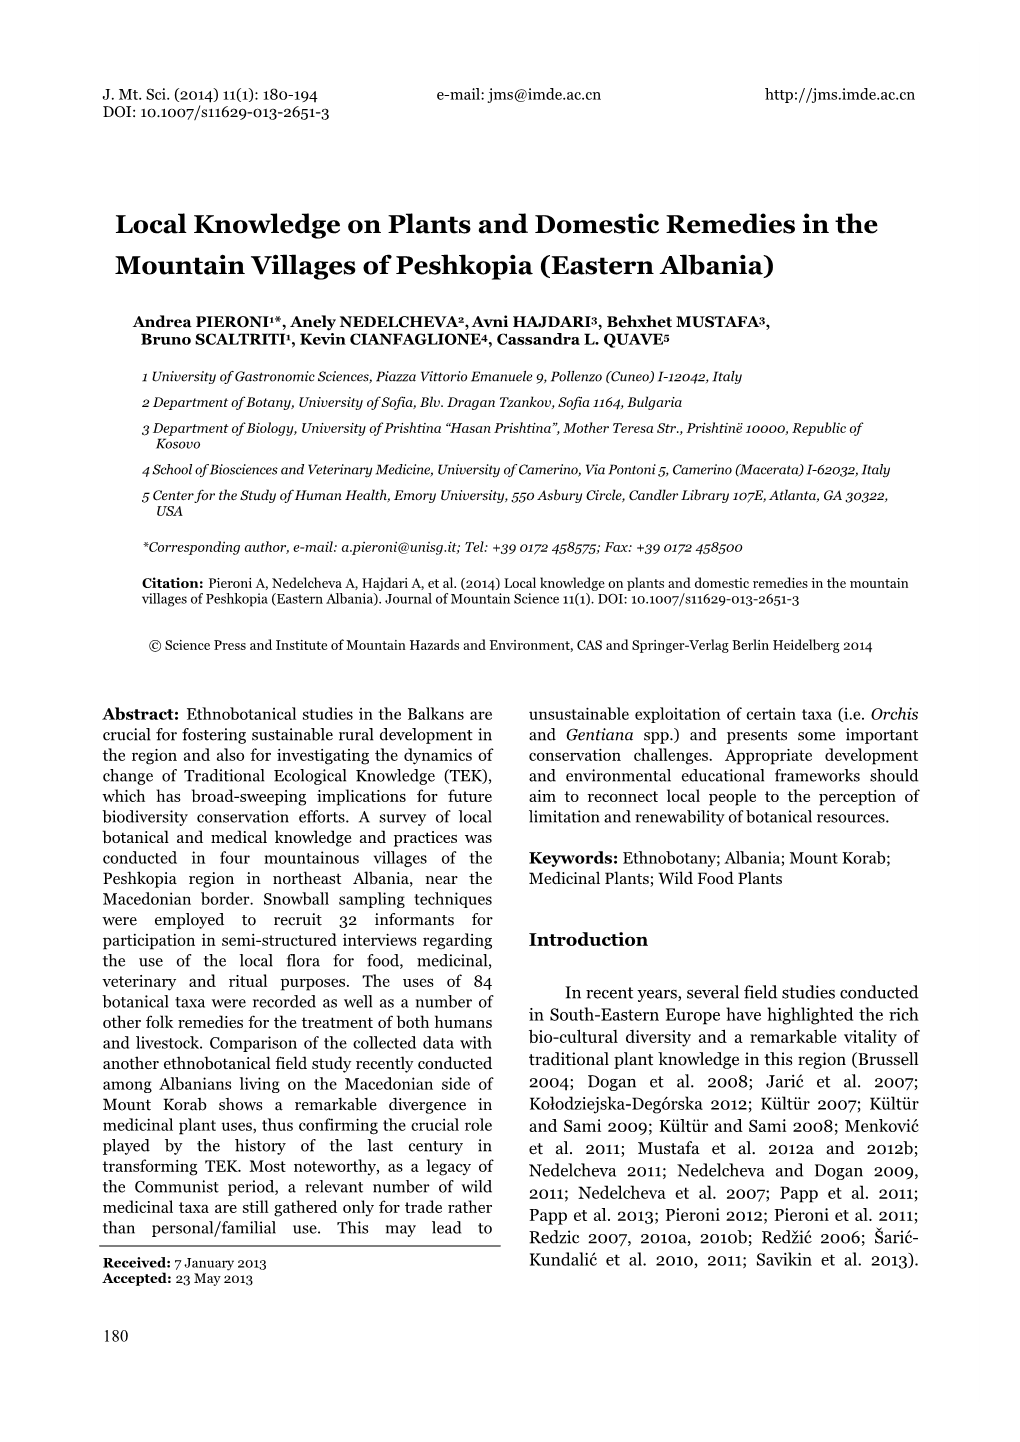 Local Knowledge on Plants and Domestic Remedies in the Mountain Villages of Peshkopia (Eastern Albania)